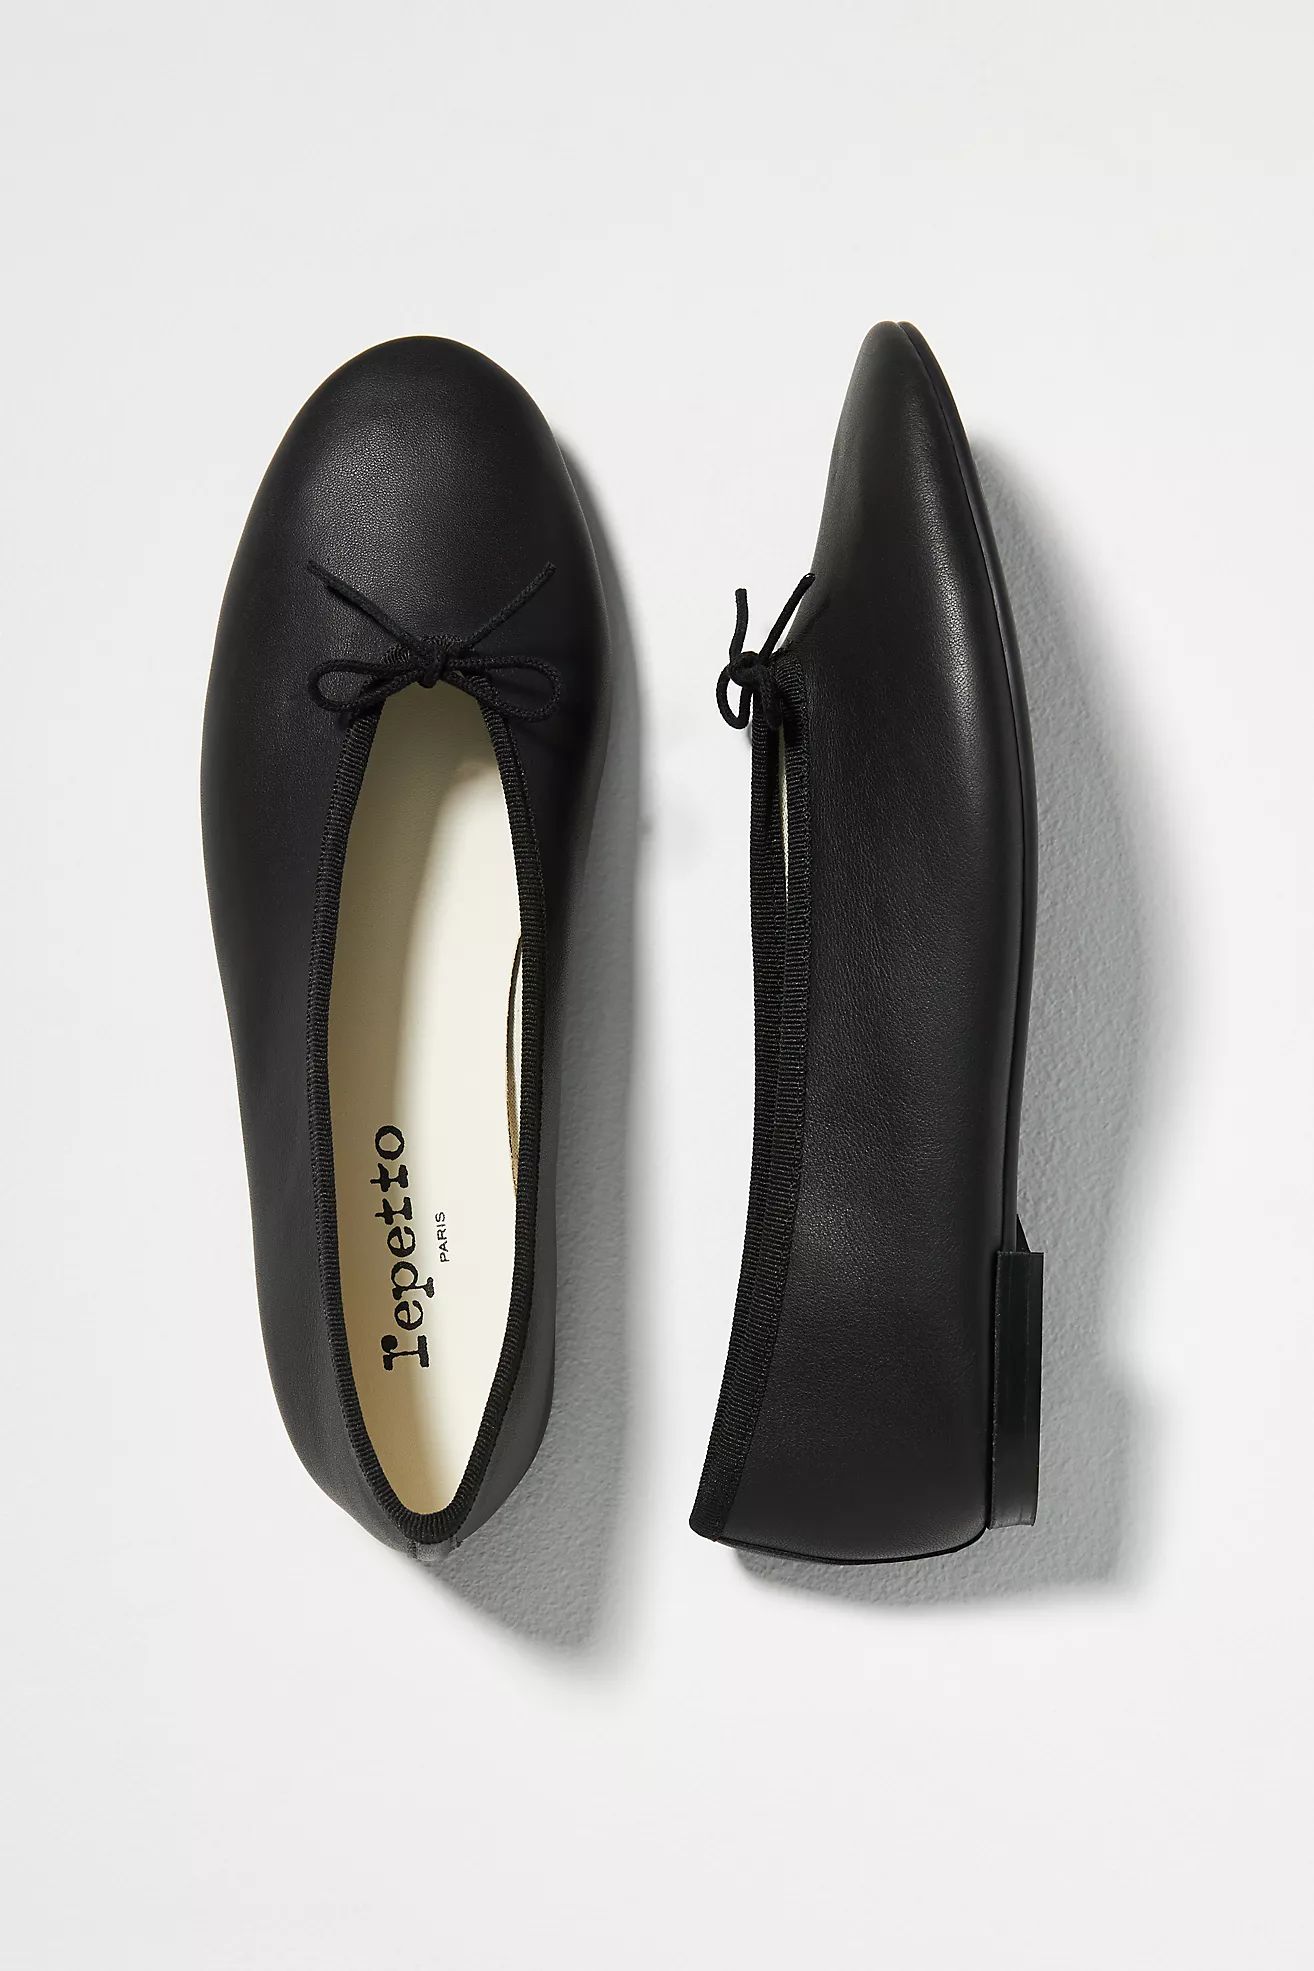 Repetto Lilouh Ballet Flats | Anthropologie (US)